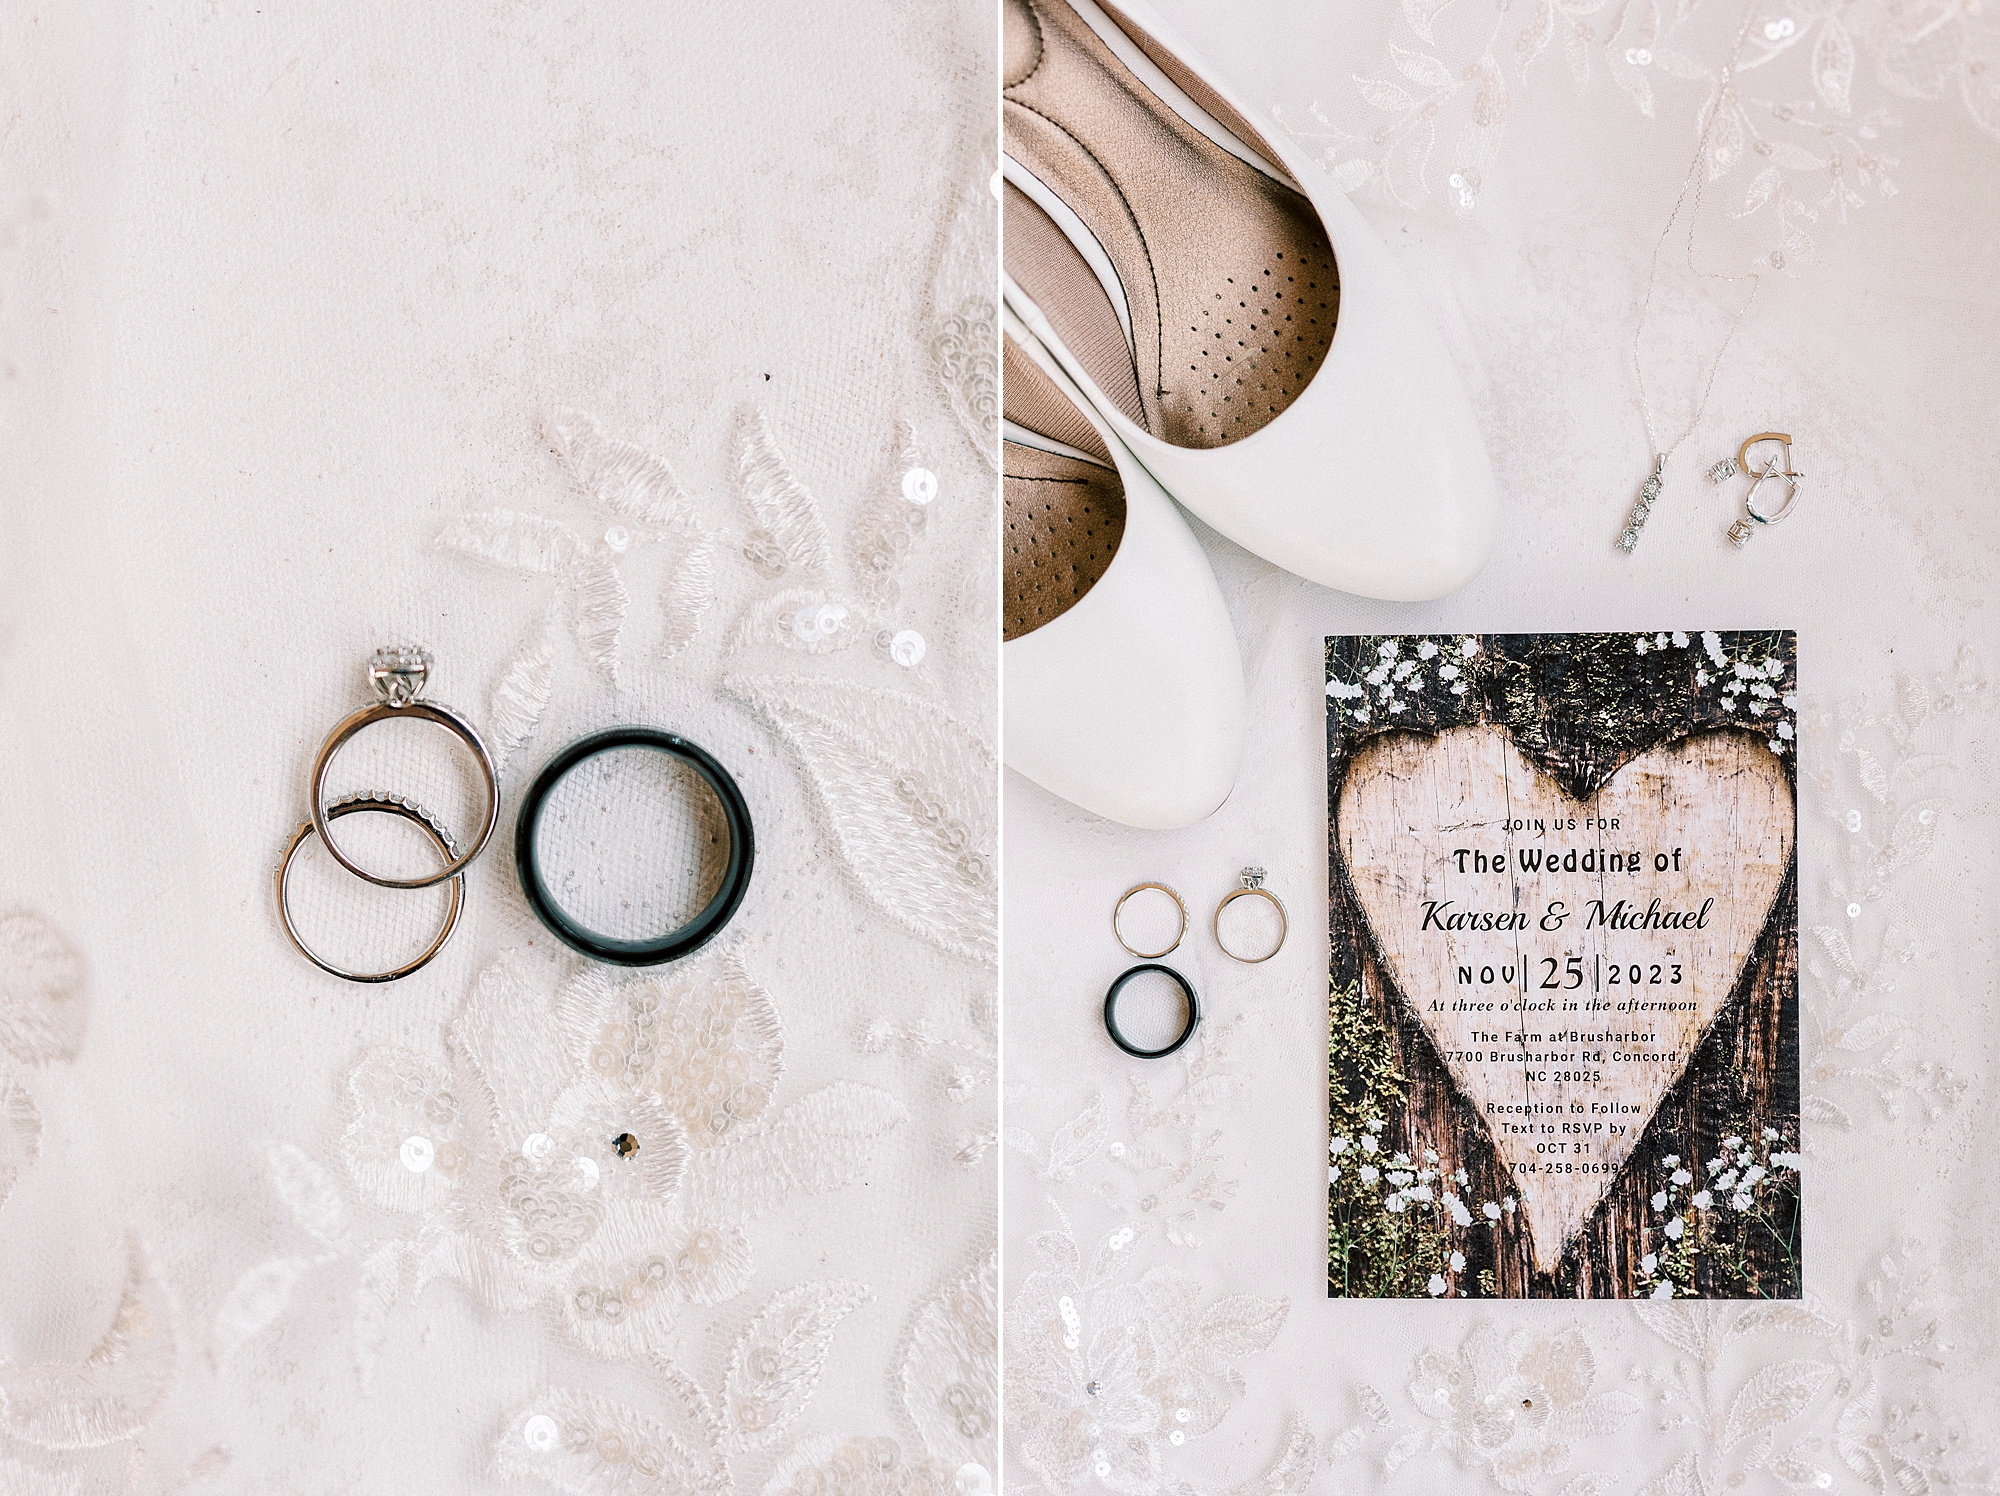 bride's rings rest on veil with rustic wedding invitation for fall wedding